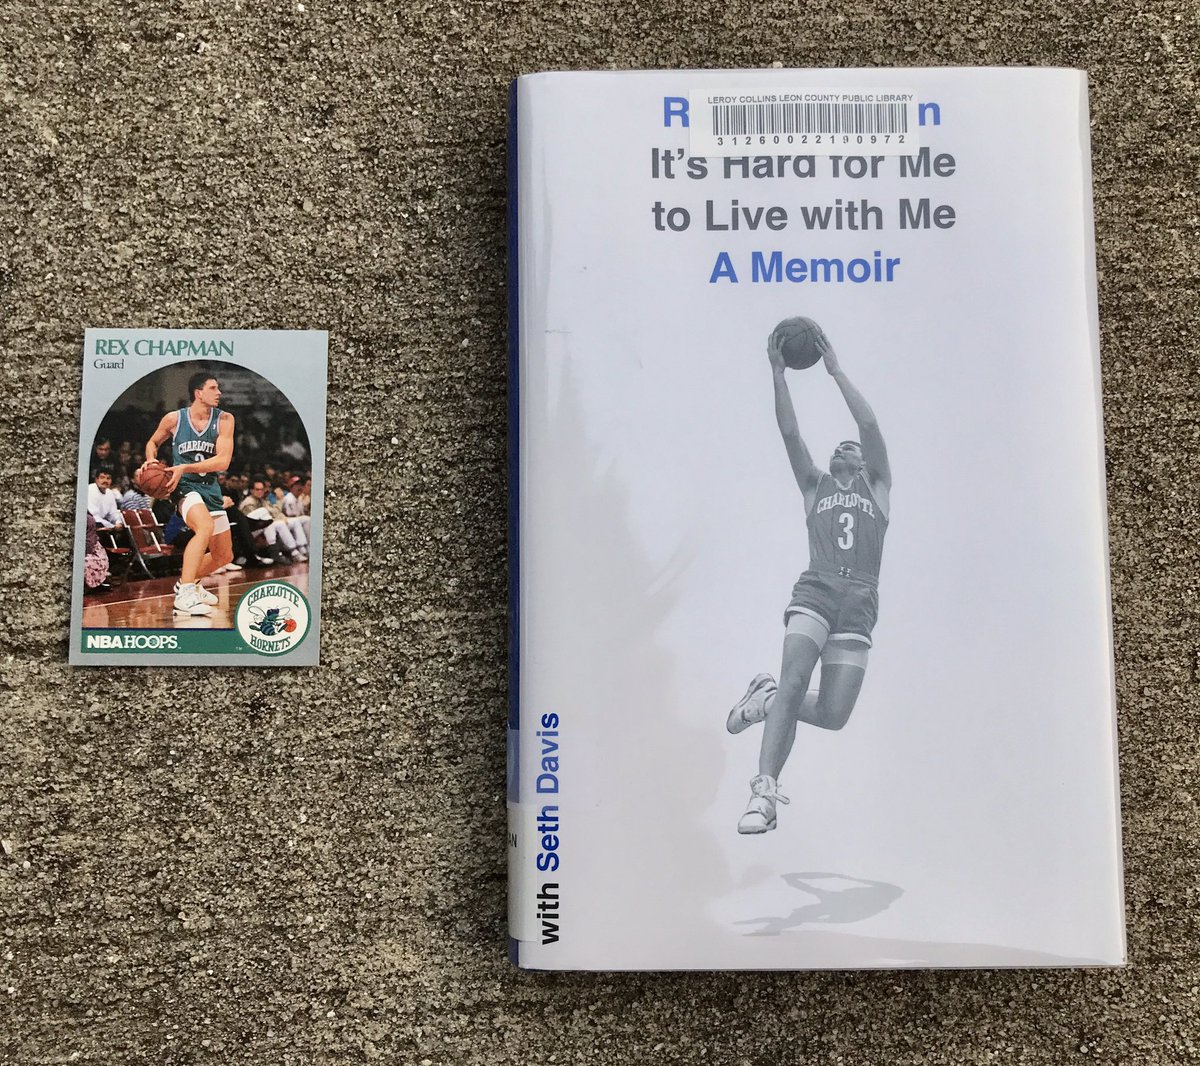 The same but different… It can be difficult to read or talk about hard subjects, times of life, but @RexChapman’s memoir of his success and struggles was a lot like talking (listening) with a friend. #Read #Books